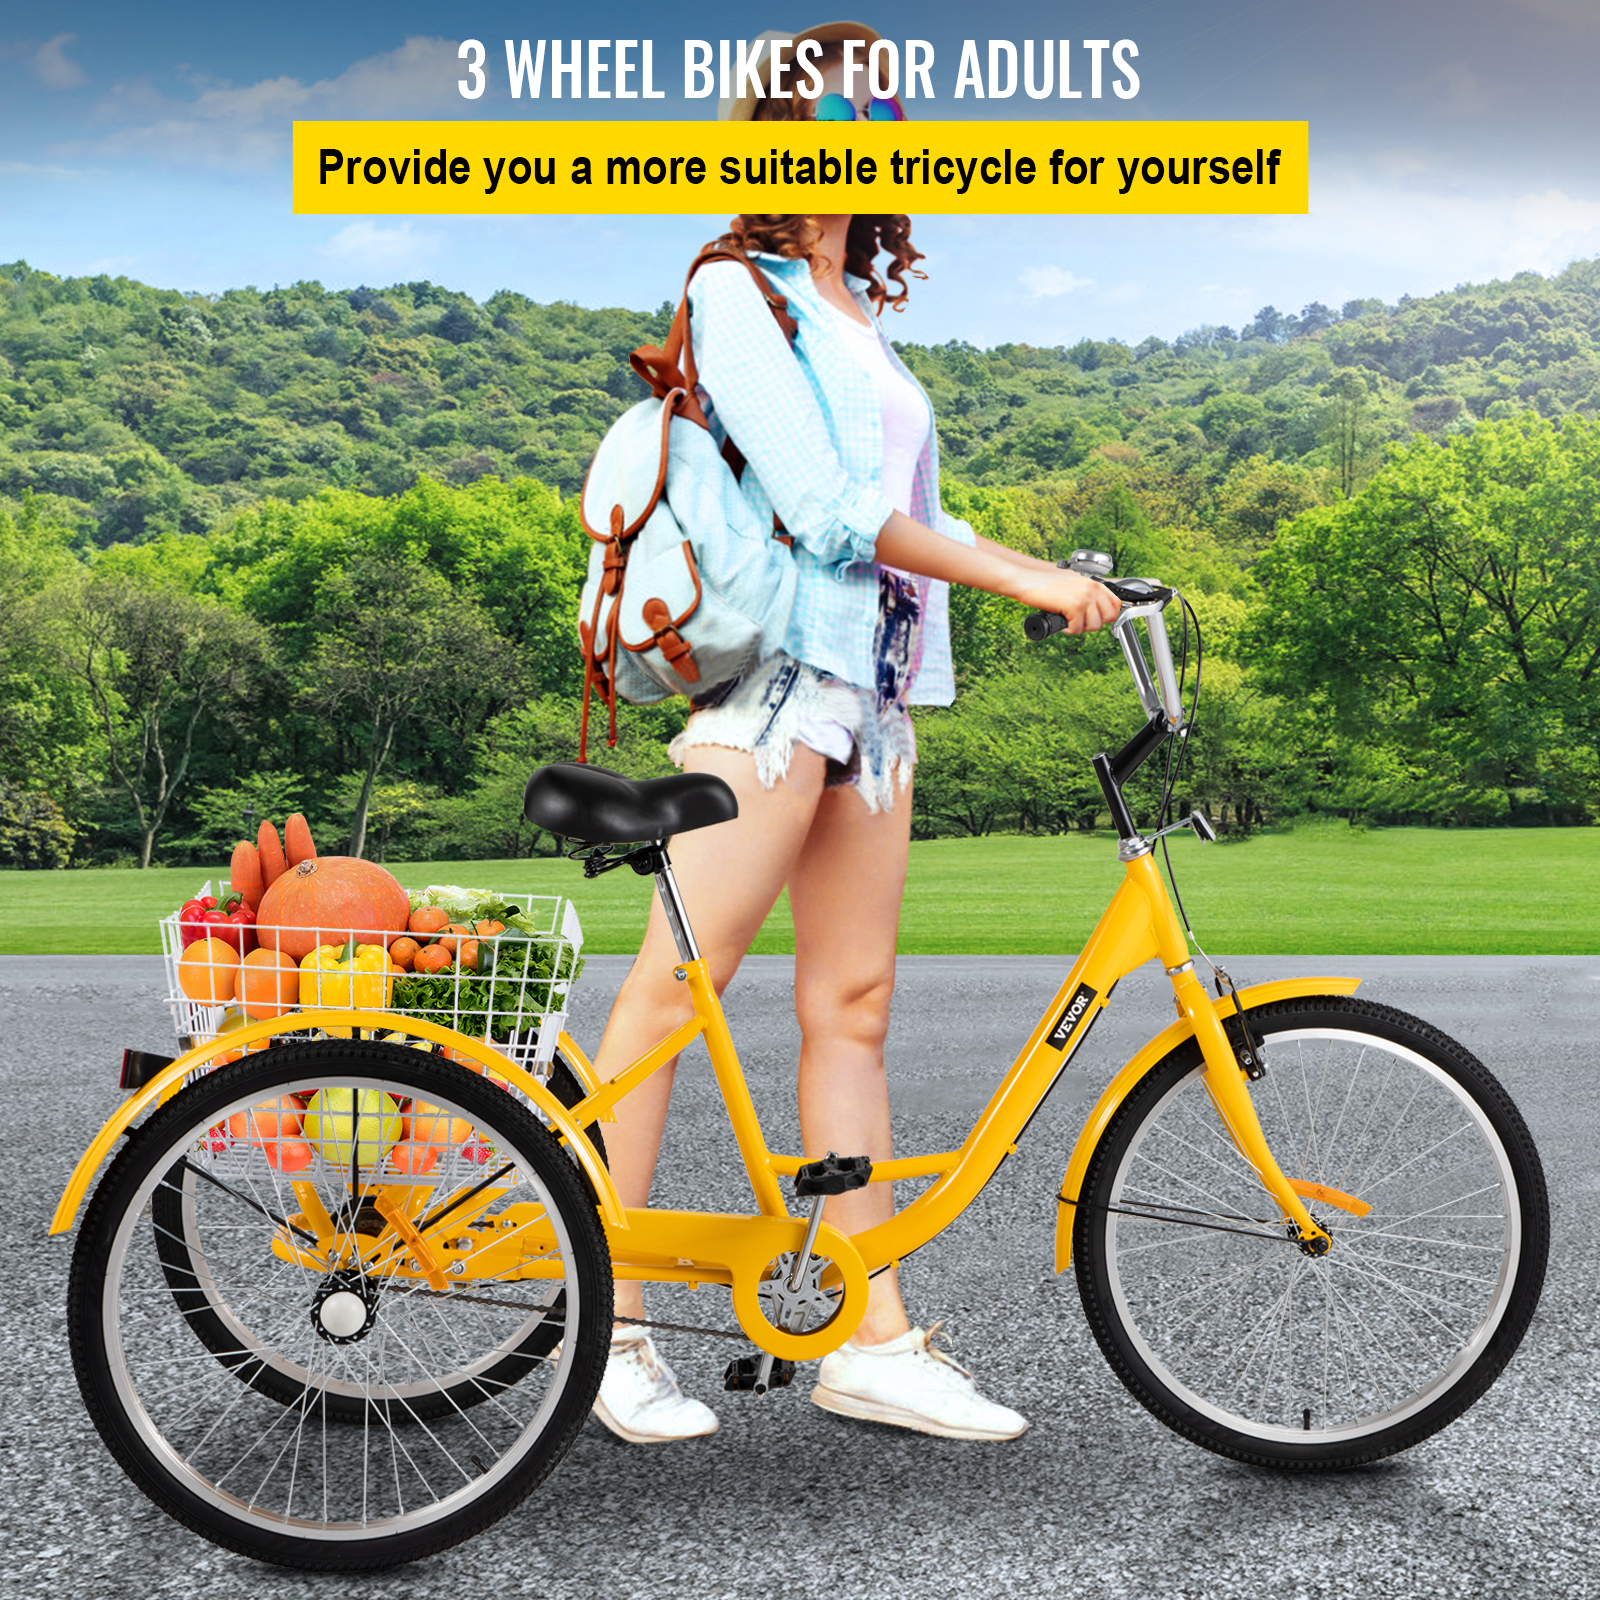 VEVOR Adult Tricycle 24 inch, 1-Speed Three Wheel Bikes , Yellow Tricycle with Bell Brake System, Bicycles with Cargo Basket for Shopping - image 2 of 9